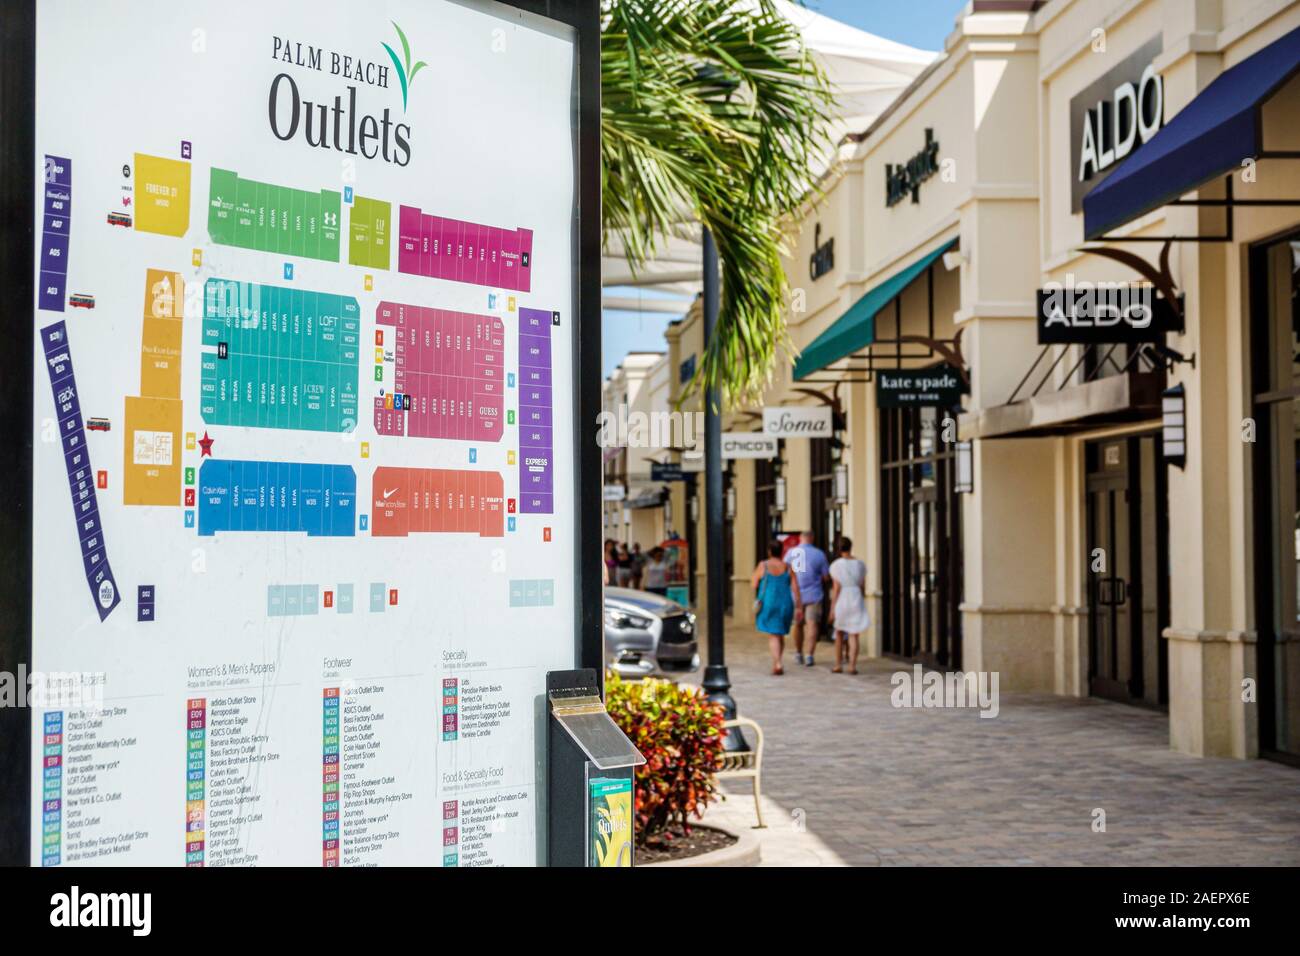 West Palm Beach Florida,Palm Beach Outlets,shopping,outdoor shopping center,store location directory map,FL190920167 Stock Photo